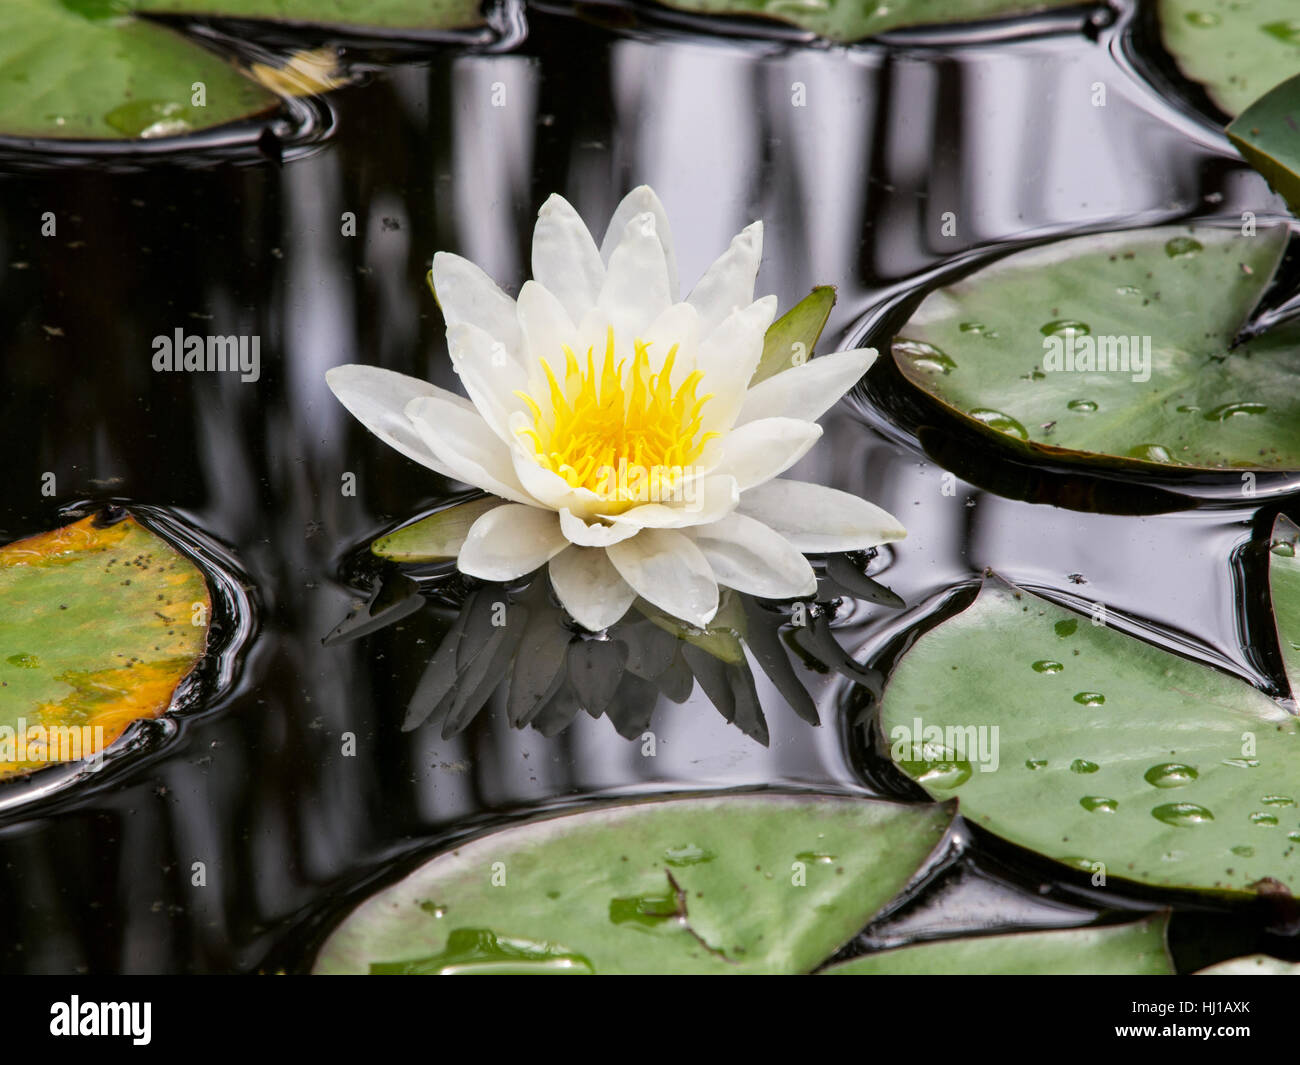 wild, graphic, conspicuous, pictographic, transparent, white, yellow, water, Stock Photo